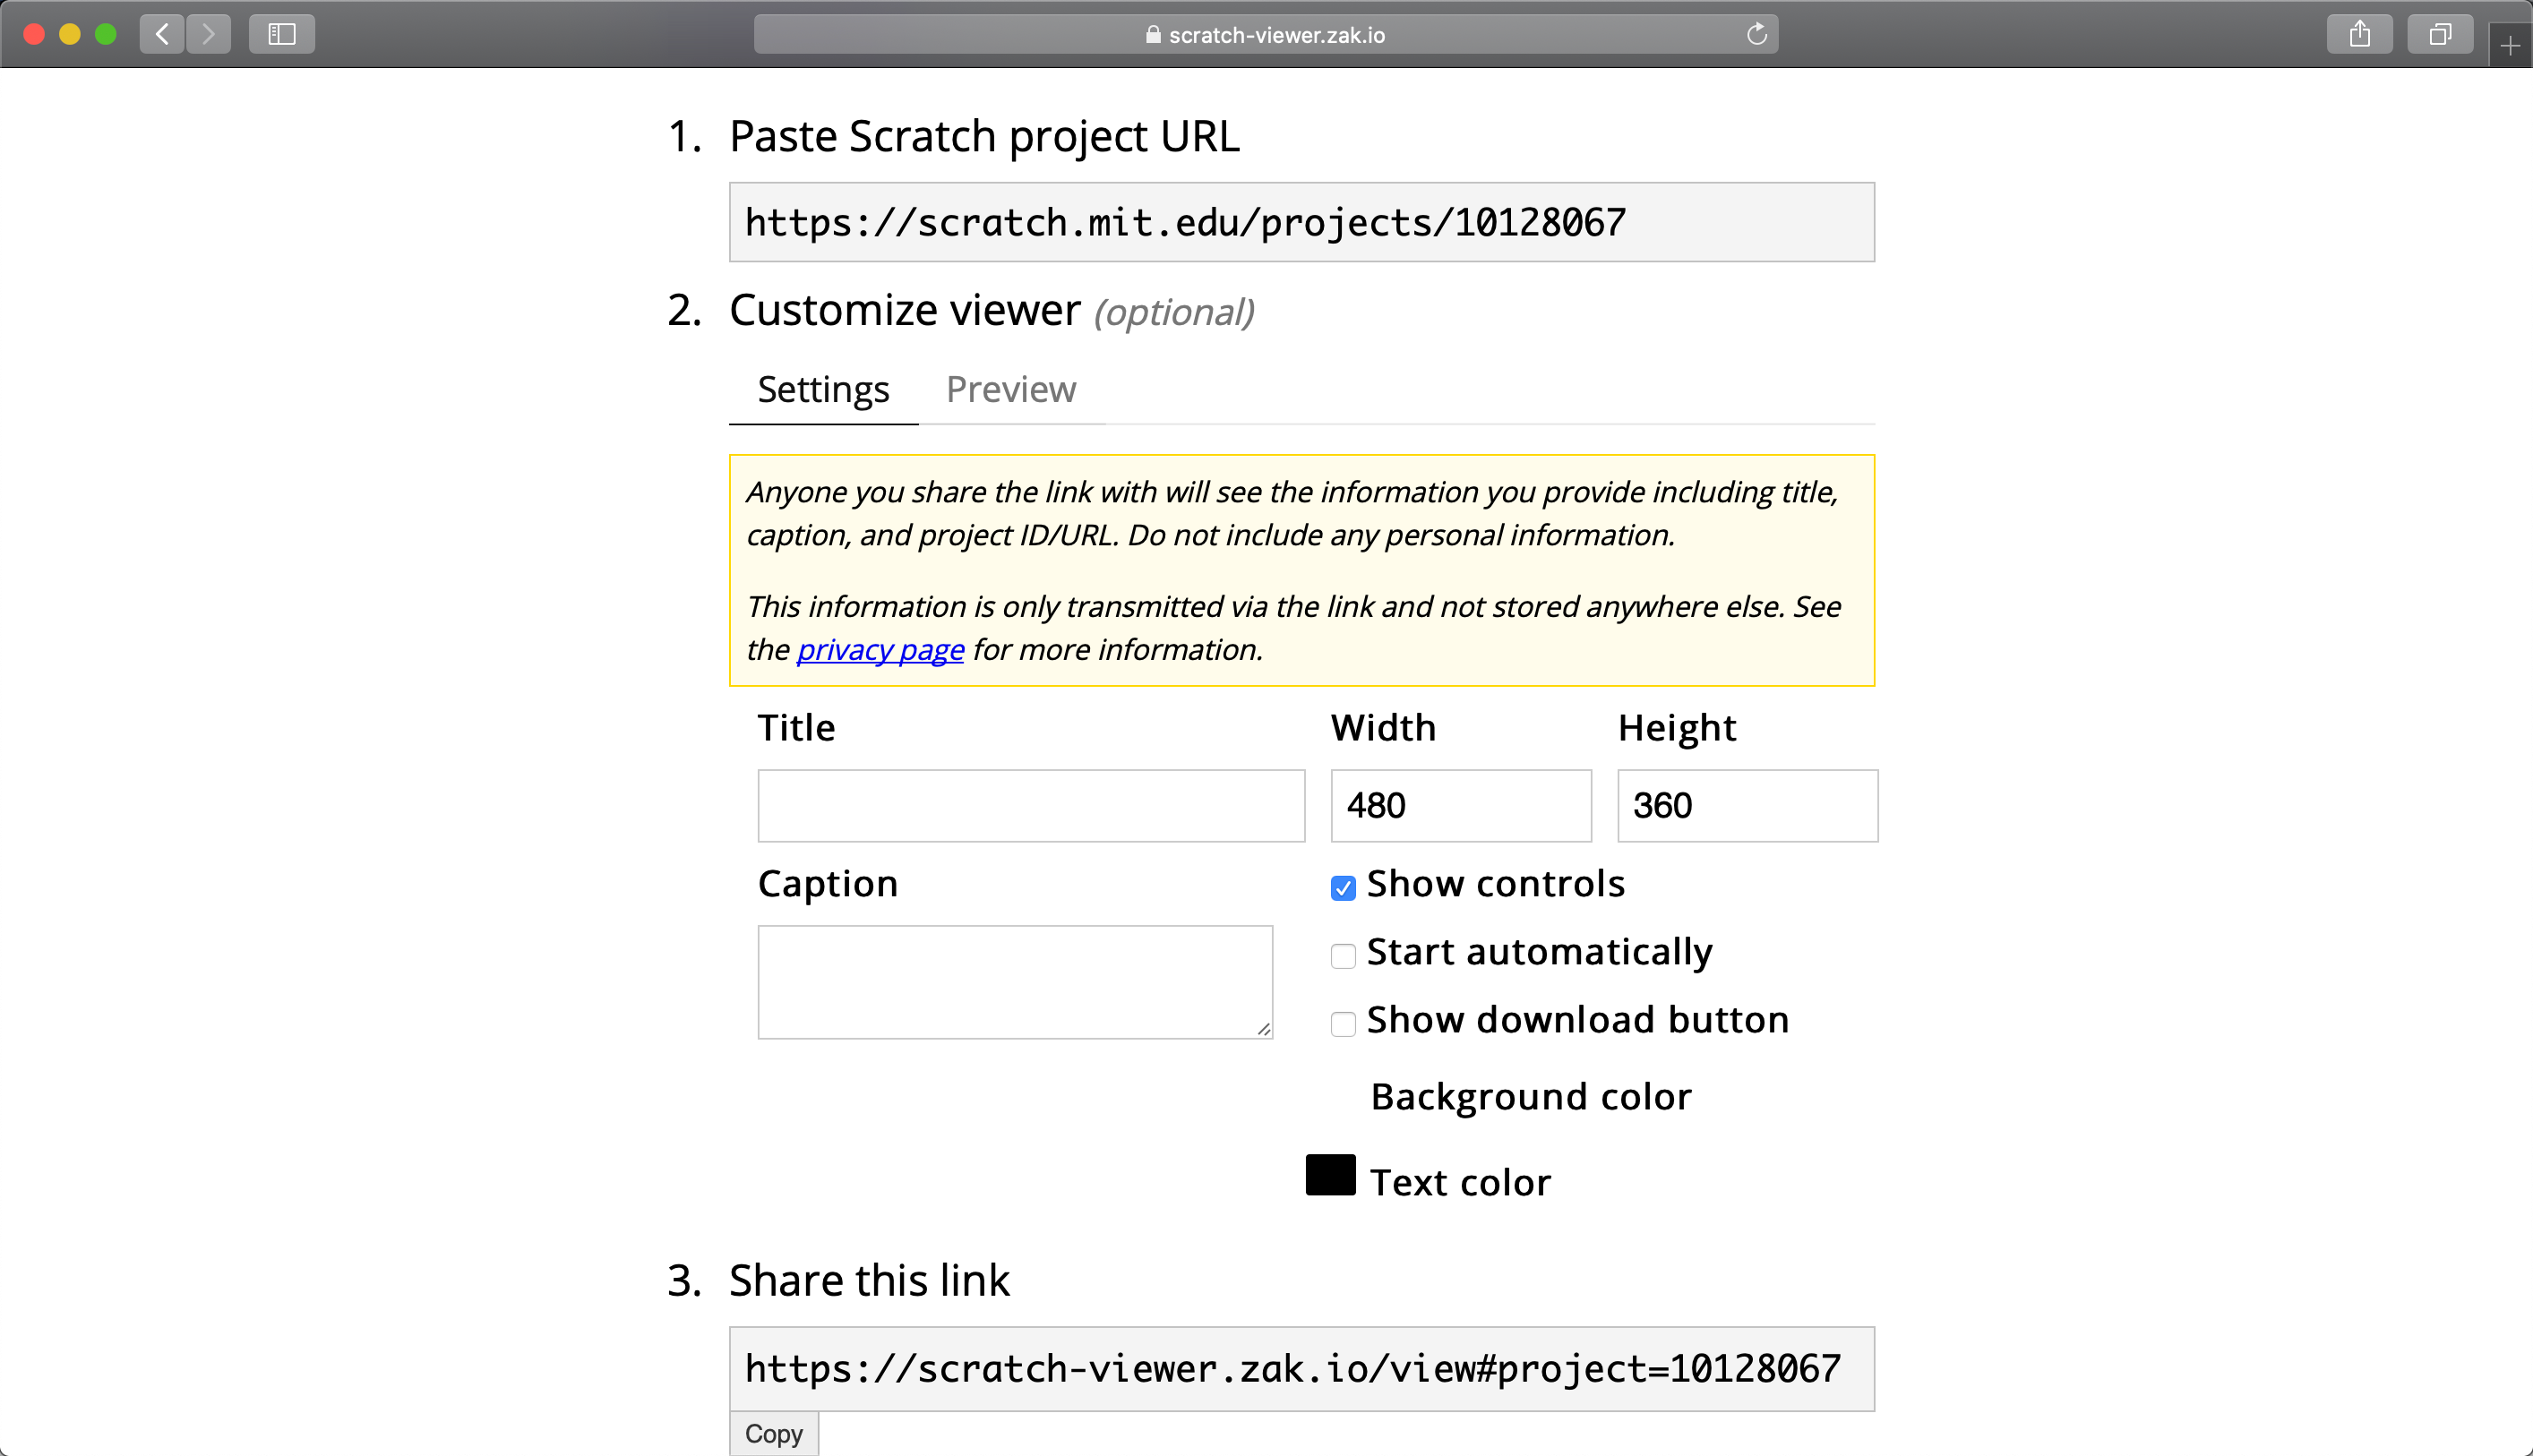 Web page showing various settings to control the display of the project viewer. Options include URL of project to embed, title, caption, dimensions, whether to show the controls, whether to start the project automatically, whether to show the download button, background color, and text color. Below the settings is a box with a URL to copy and share.